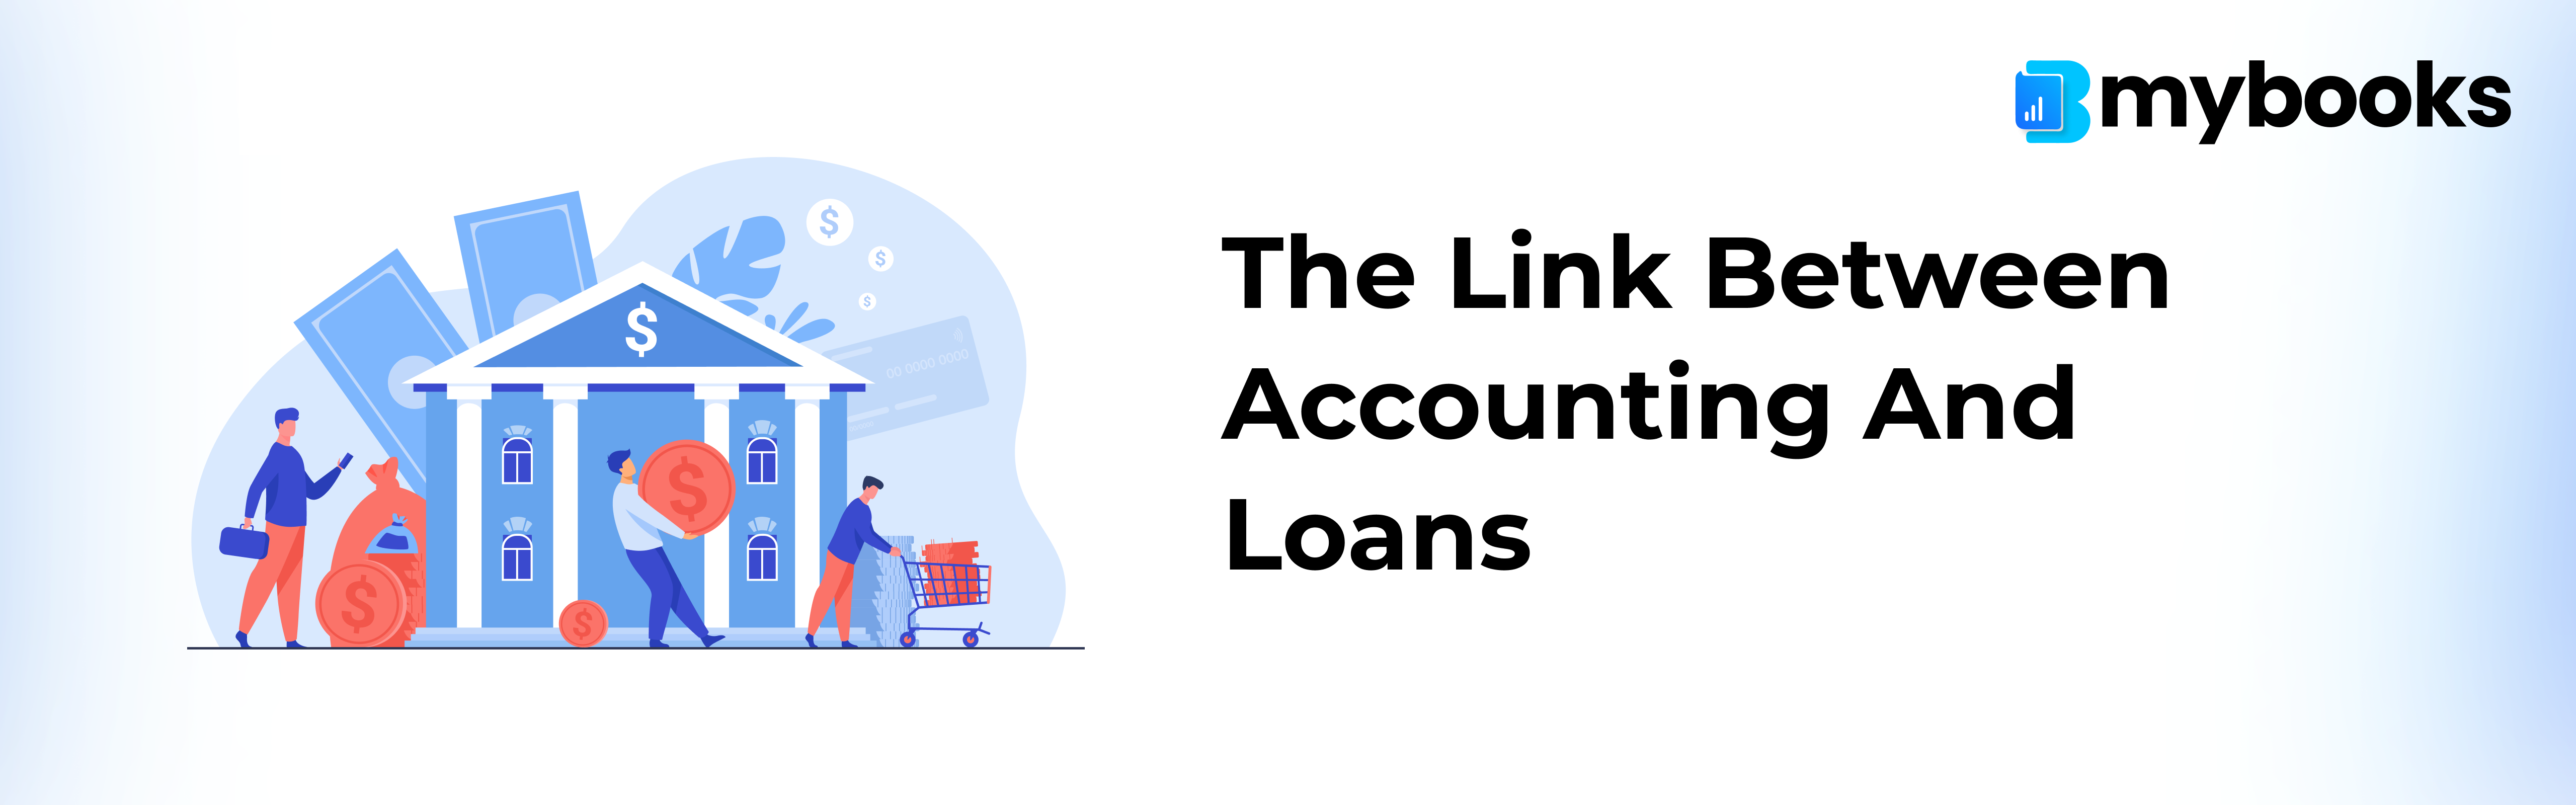 The-Link-Between-Accounting-and-Loans